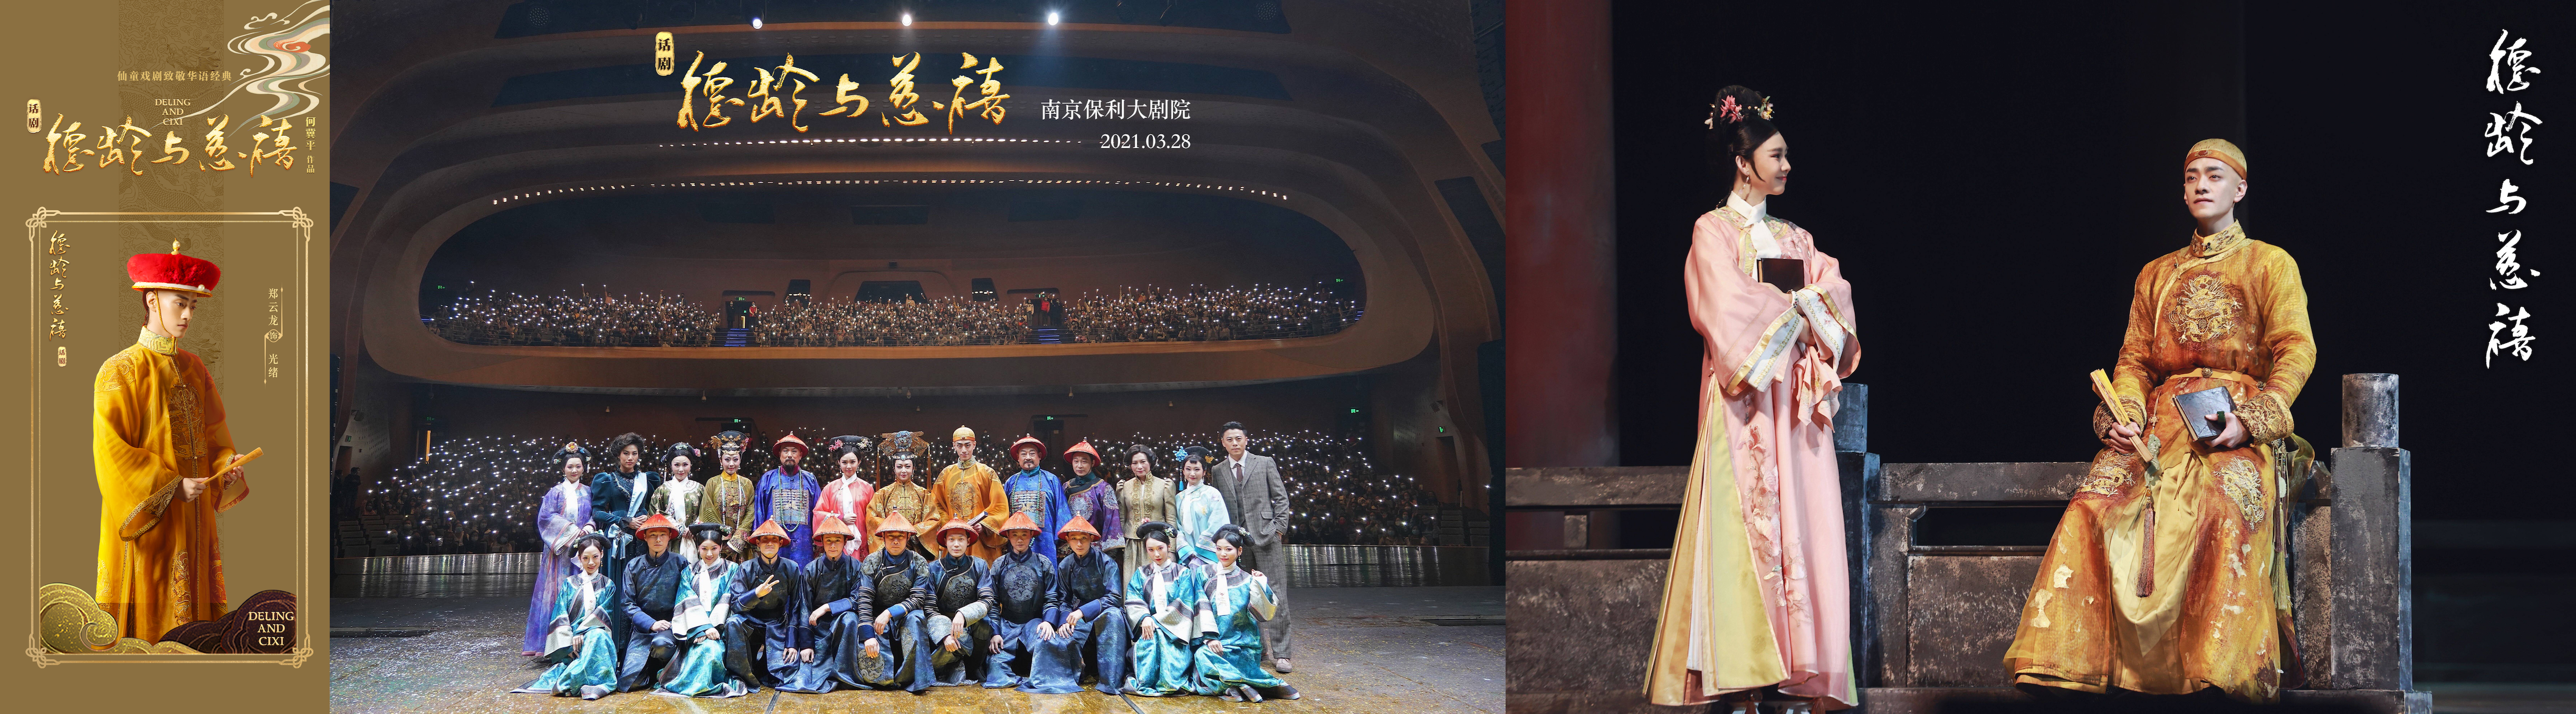 A series of promotional photographs showing actors in traditional Chinese dress with titles in Chinese characters. In the first one, a young man dressed in gold with a red hat stands holding a fan and looking pensive. The second is a full cast shot, posed on the stage of a packed auditorium full of audience members holding up glowing phones. In the third, a woman and a man are on stage, mid-scene: she is dressed in a pink robe with her hair up, decorated with pink flowers and holding a book; he is dressed in gold and sitting on a wooden structure, holding a fan and a book.